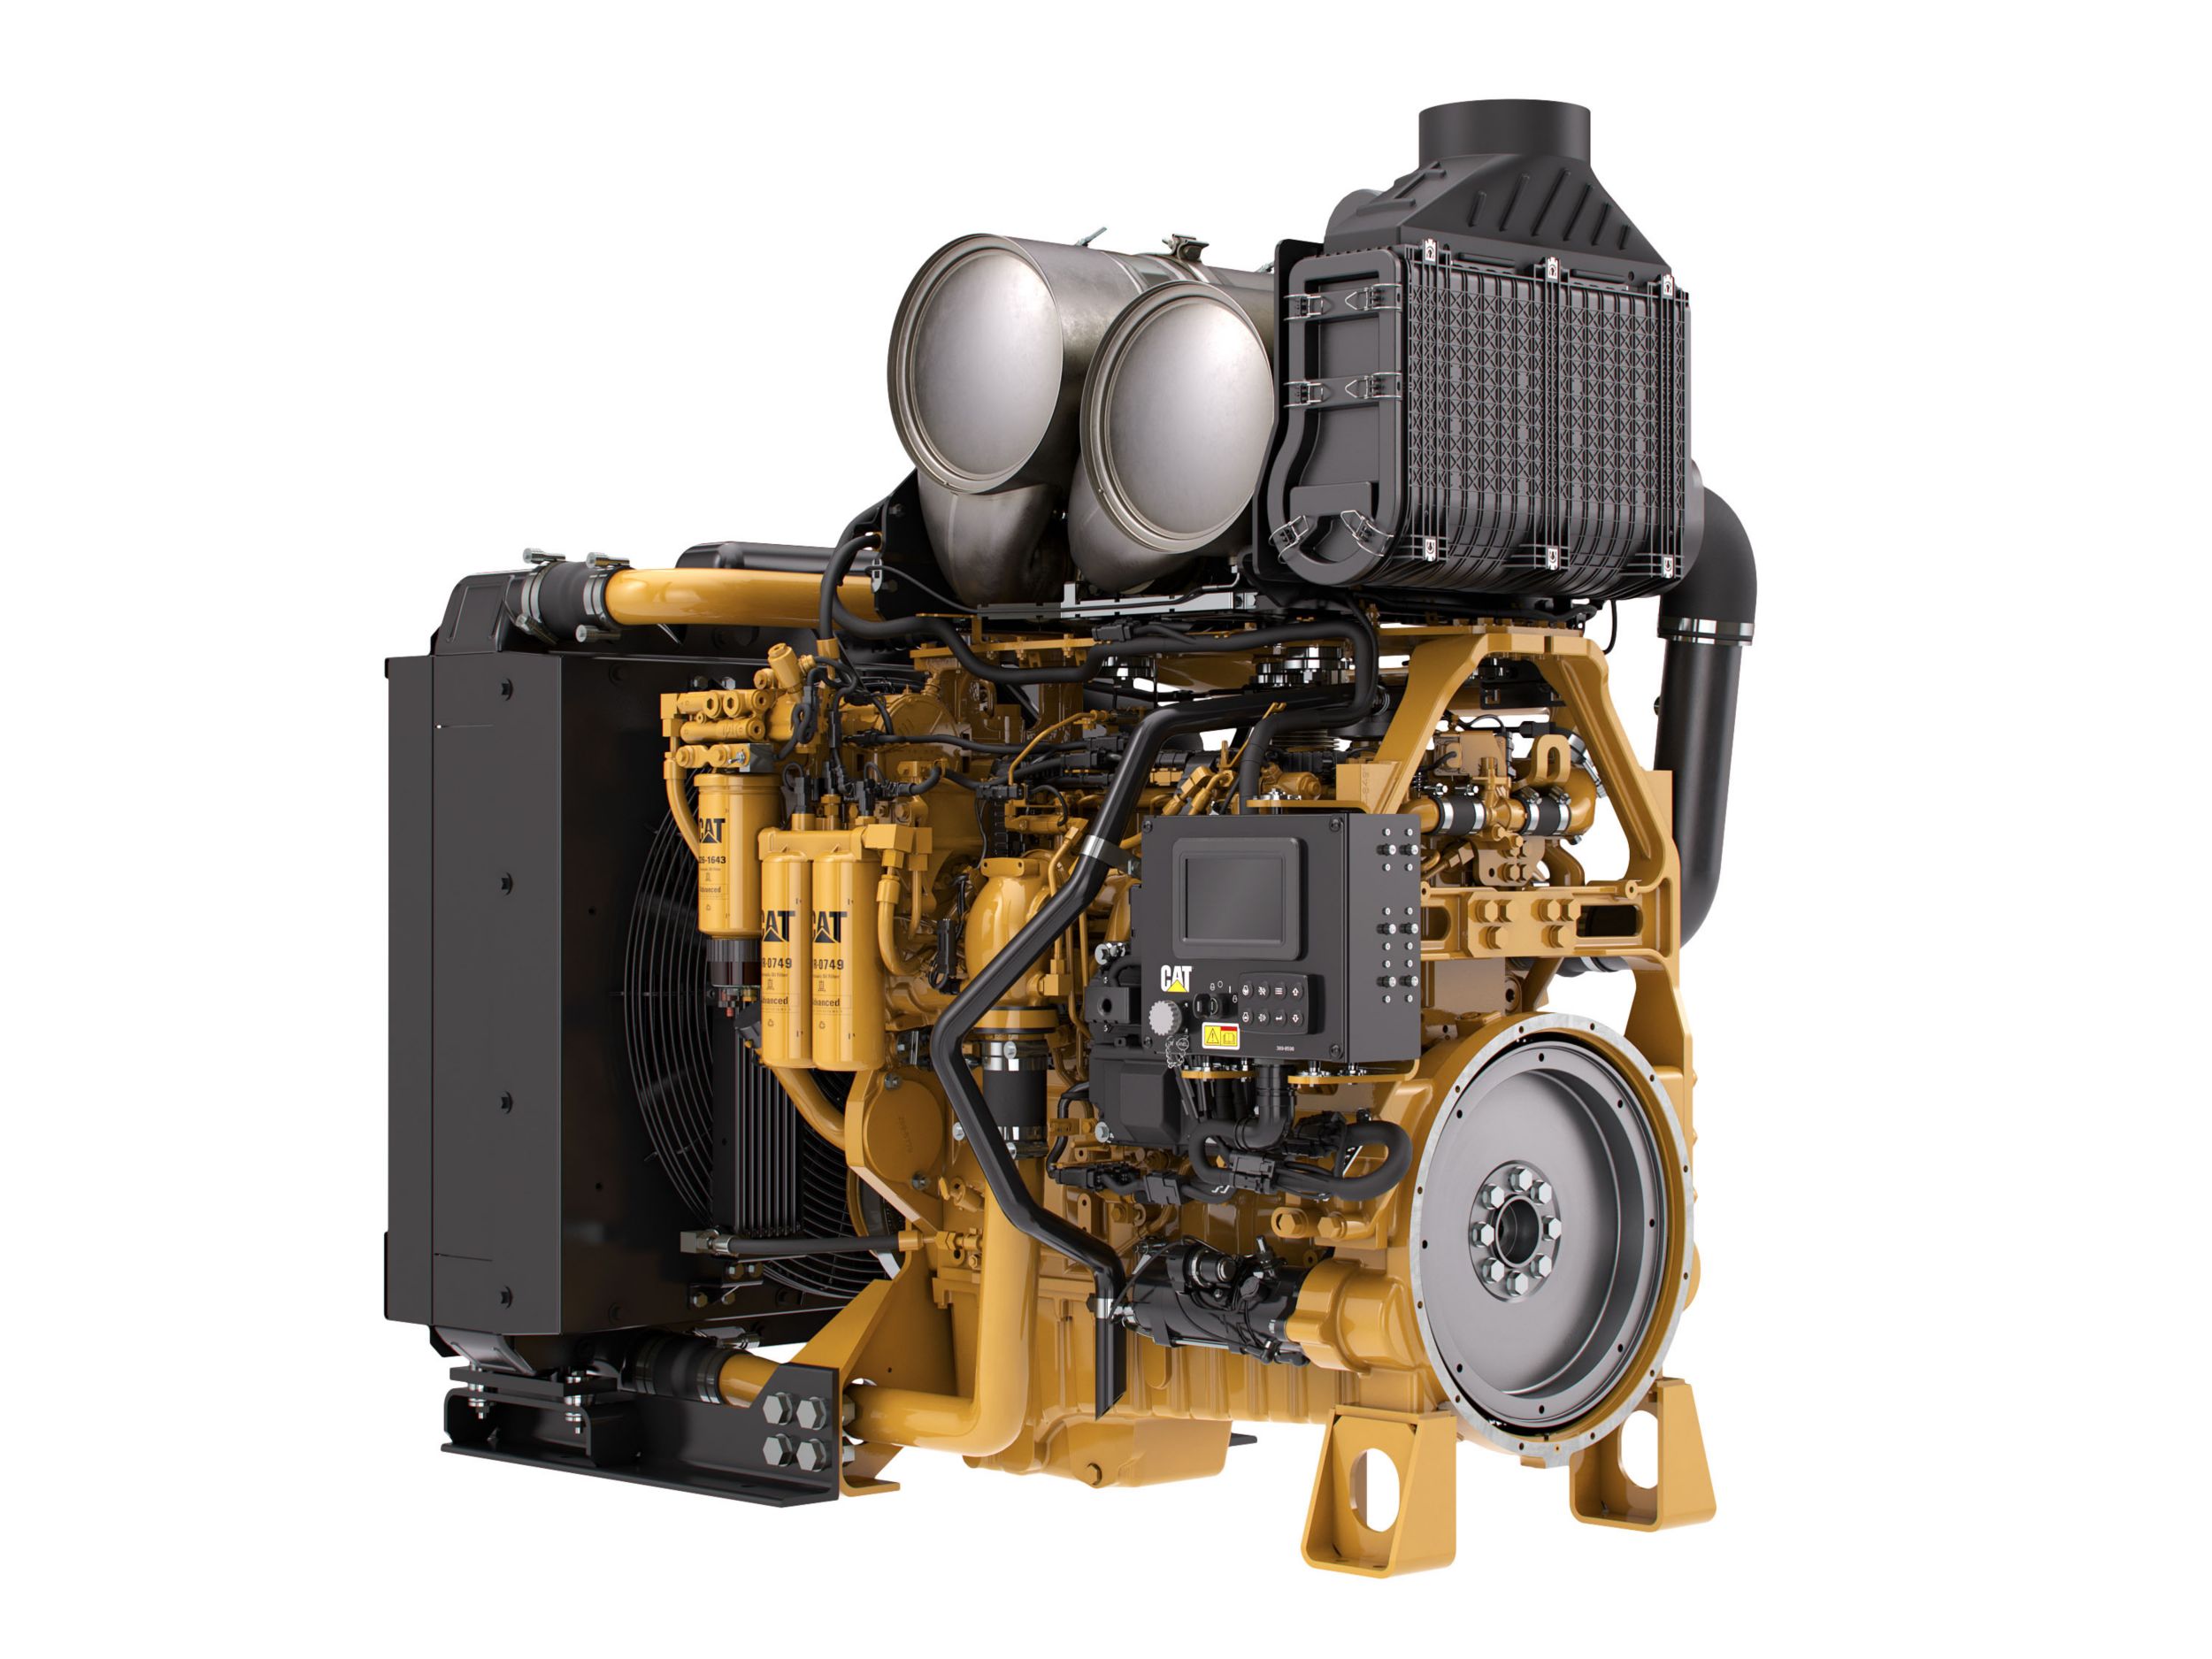 C9.3 ACERT Tier 4 Industrial Power Unit Diesel Power Units - Highly Regulated